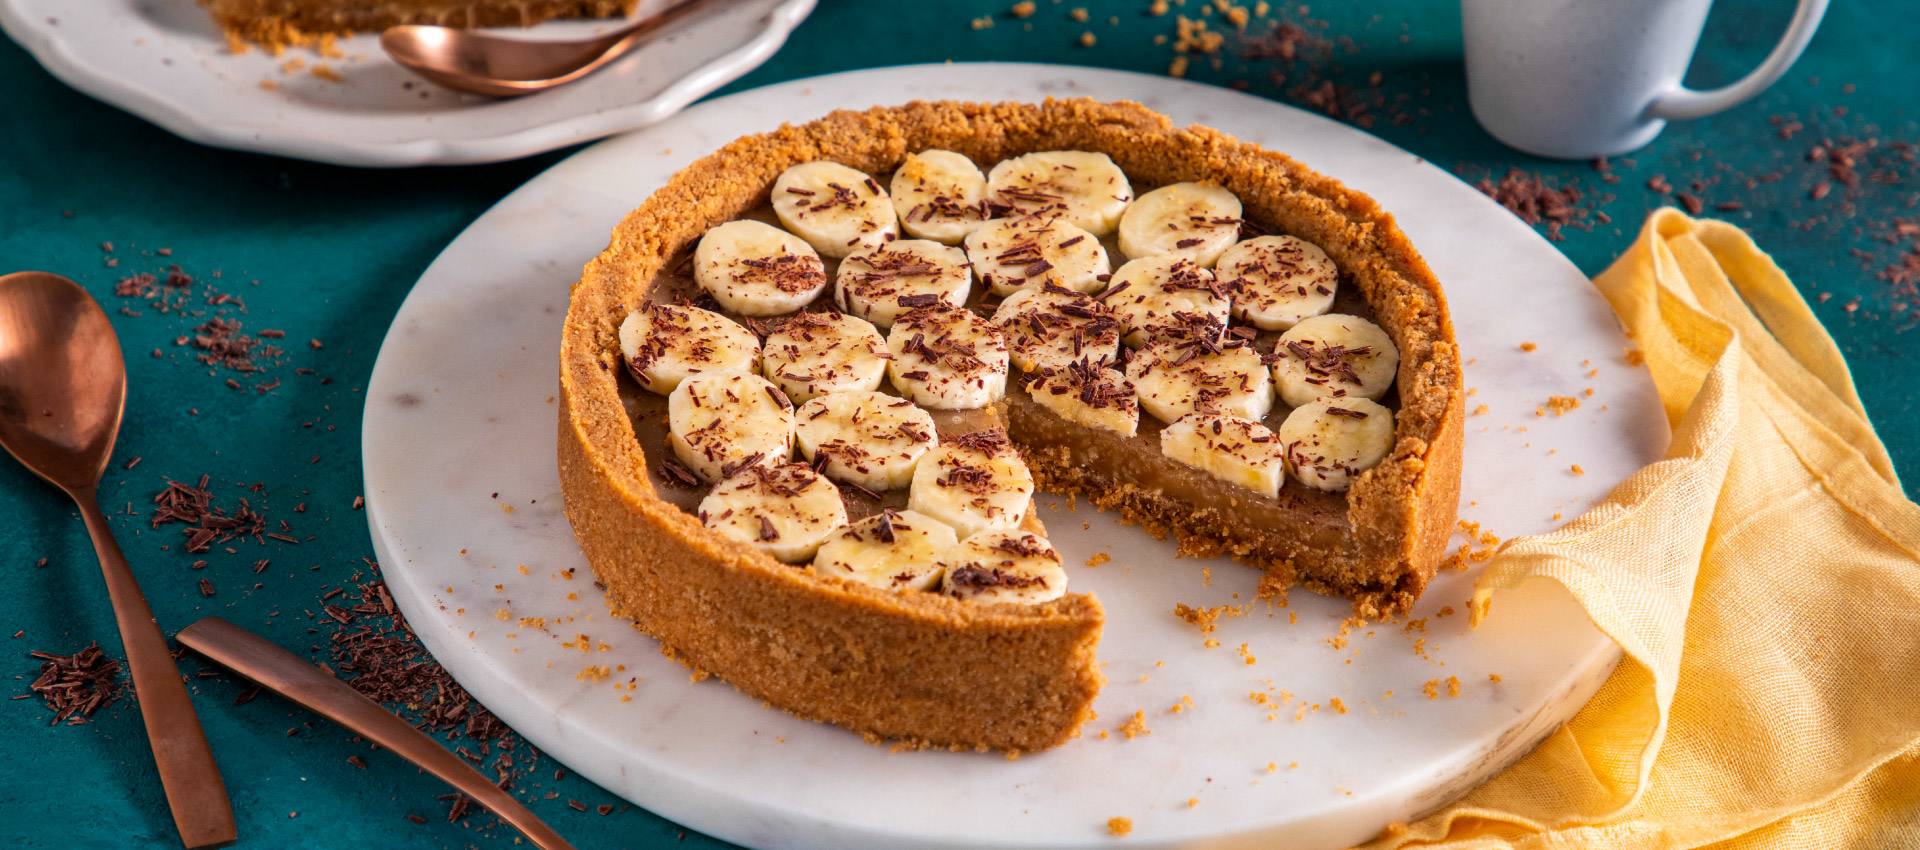 Banoffee Cake: Fluffy Banana Cake with Toffee Filling